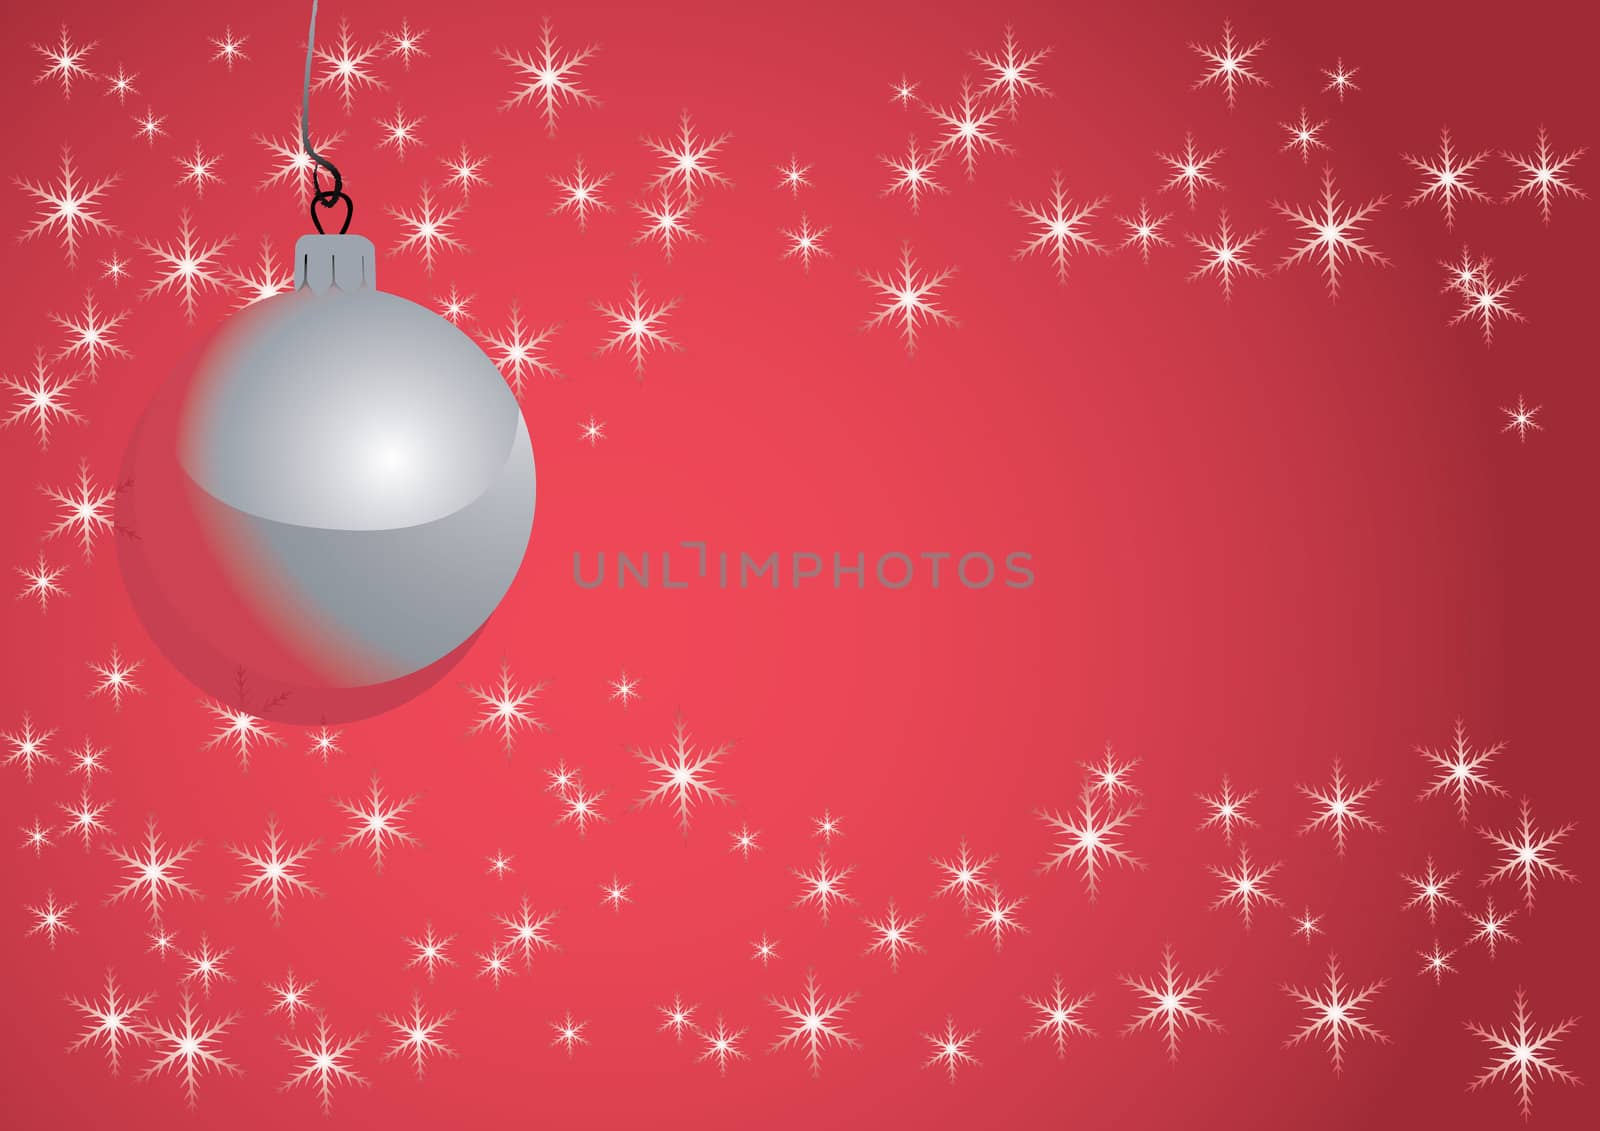 Christmas ball hanging on red background with snowflakes